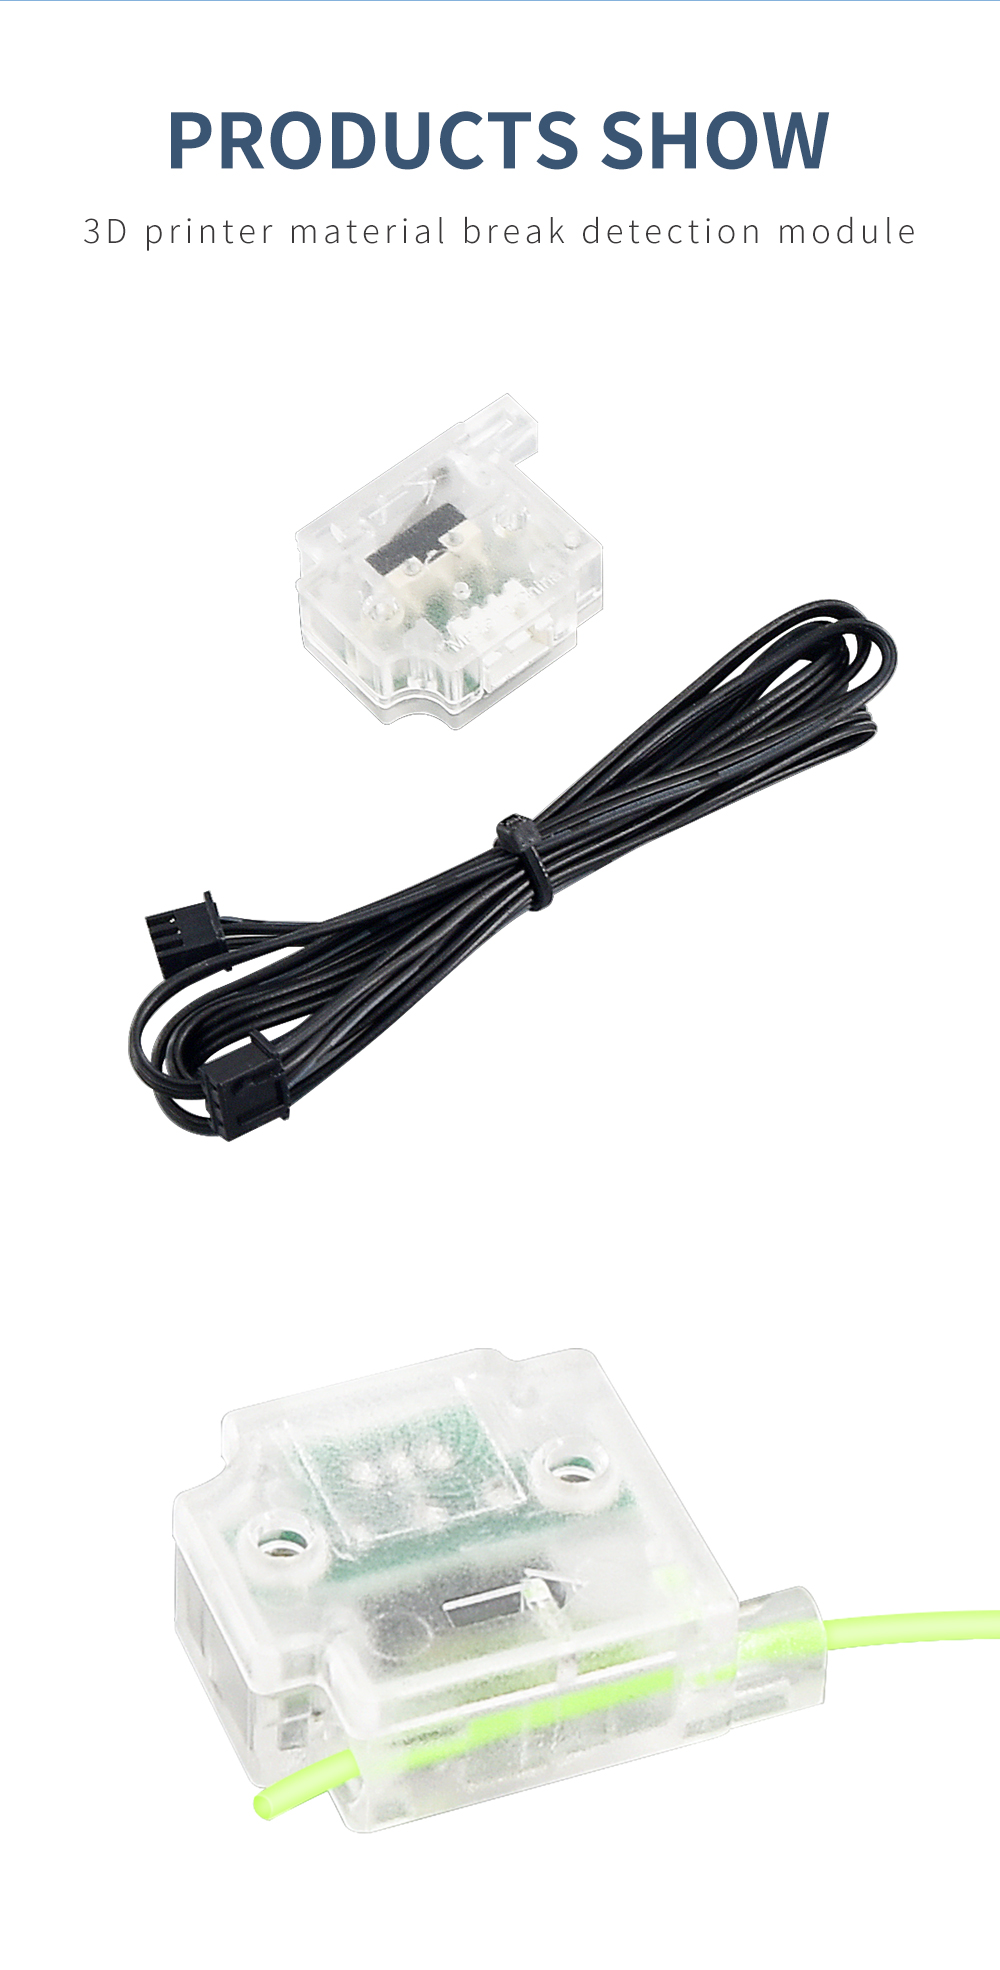 TWO TREES® Filament Break Detection Module With 1M Cable Run-out Sensor Material Runout Detector For Ender 3 CR10 3D Printer